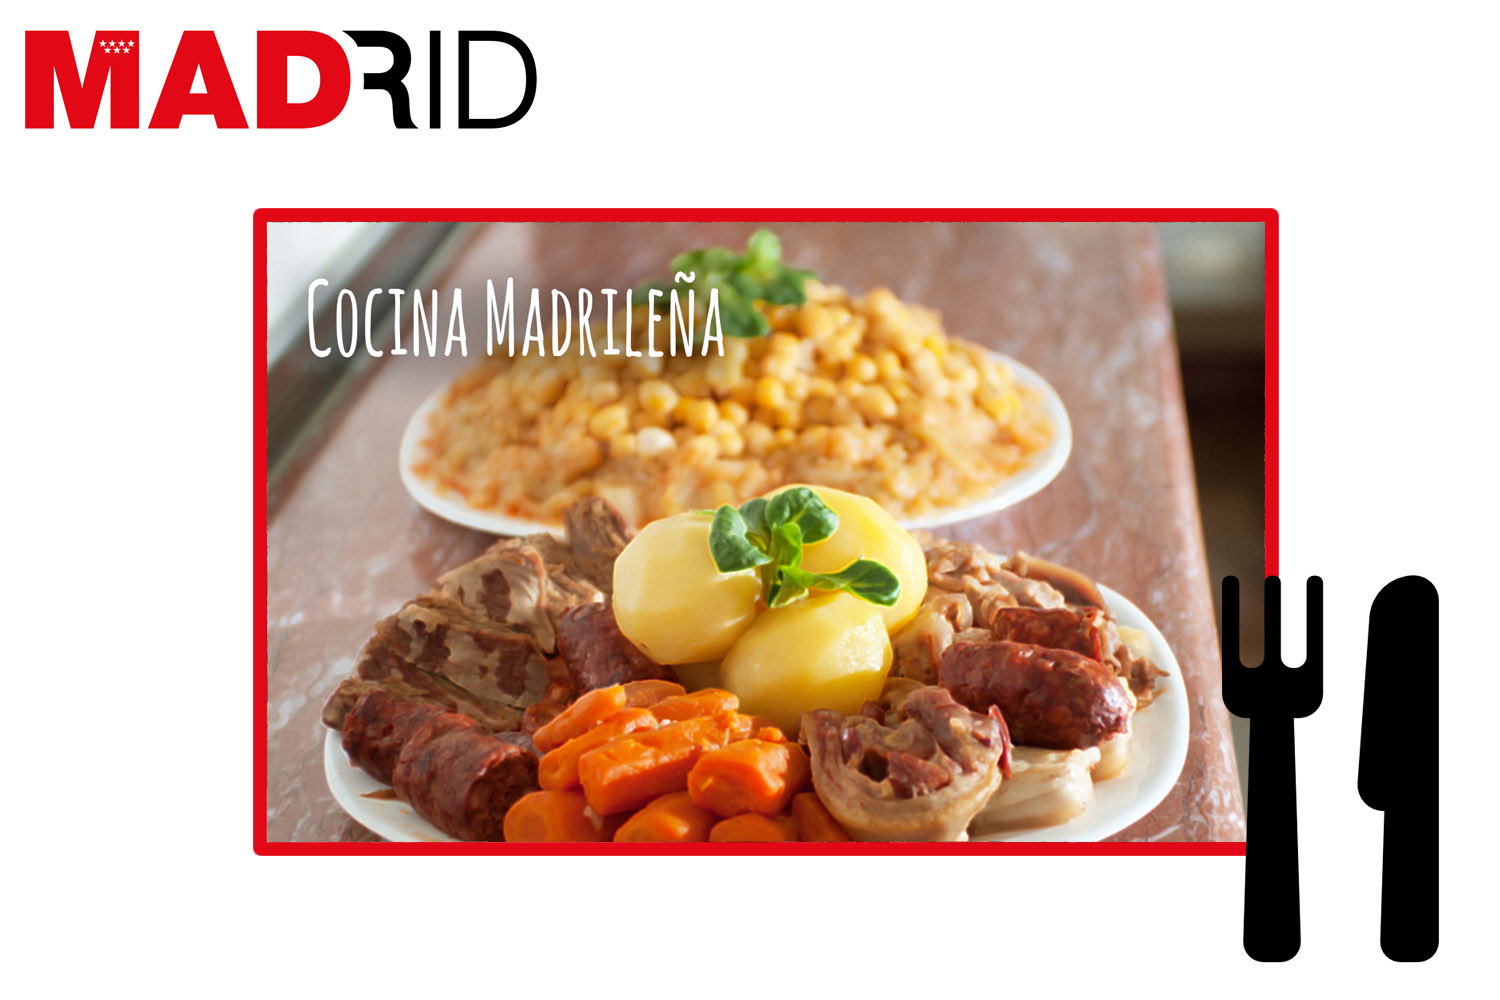 Typical dishes from Madrid